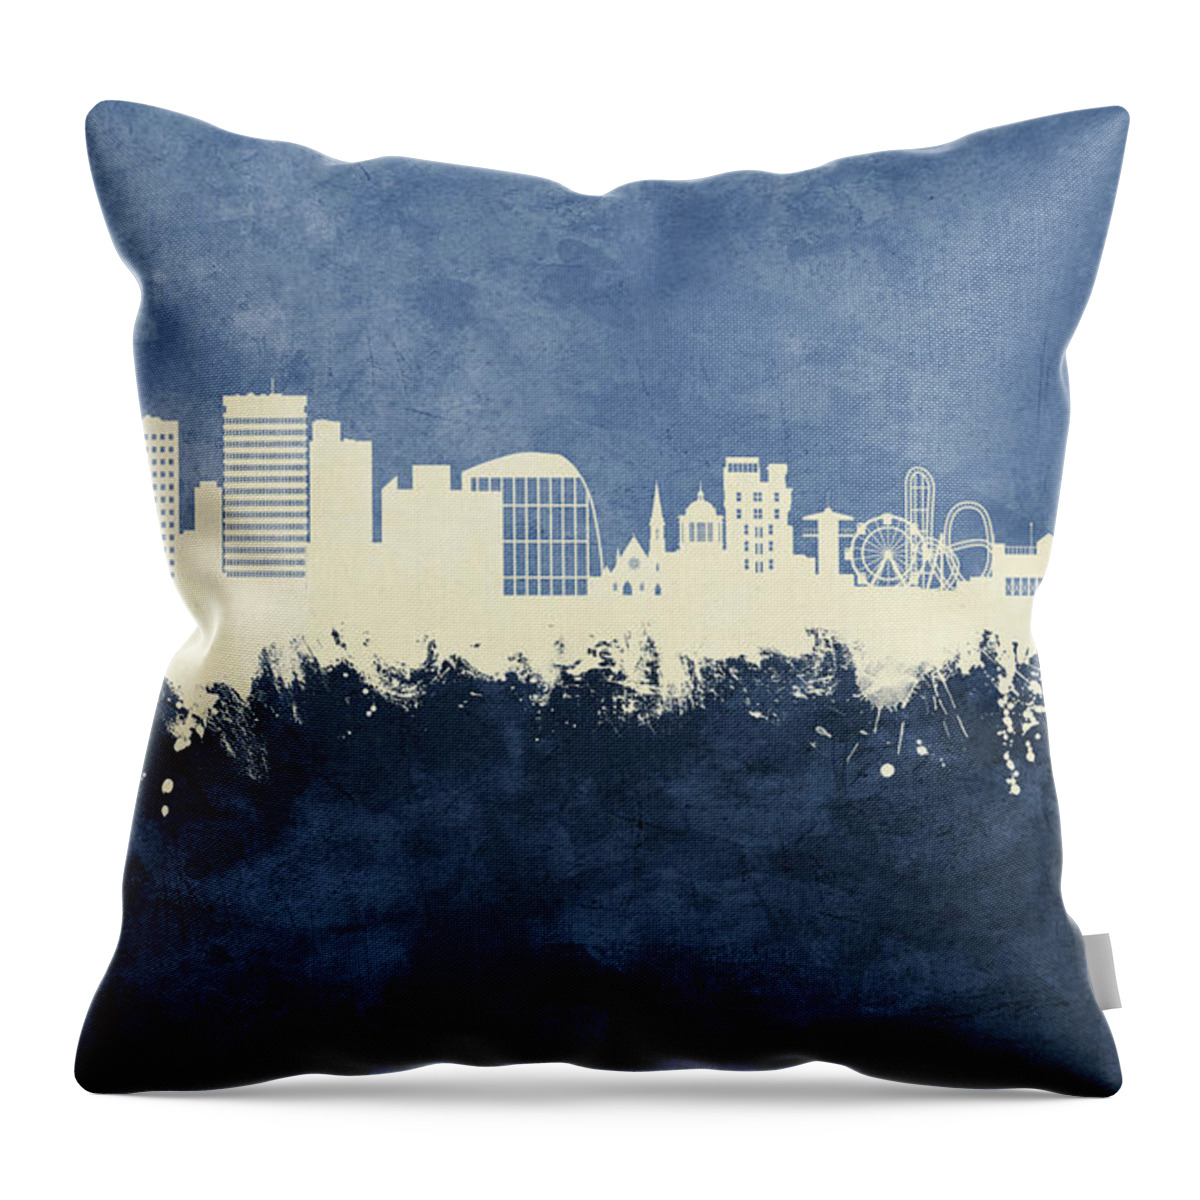 Southend-on-sea Throw Pillow featuring the digital art Southend-on-Sea England Skyline #29 by Michael Tompsett